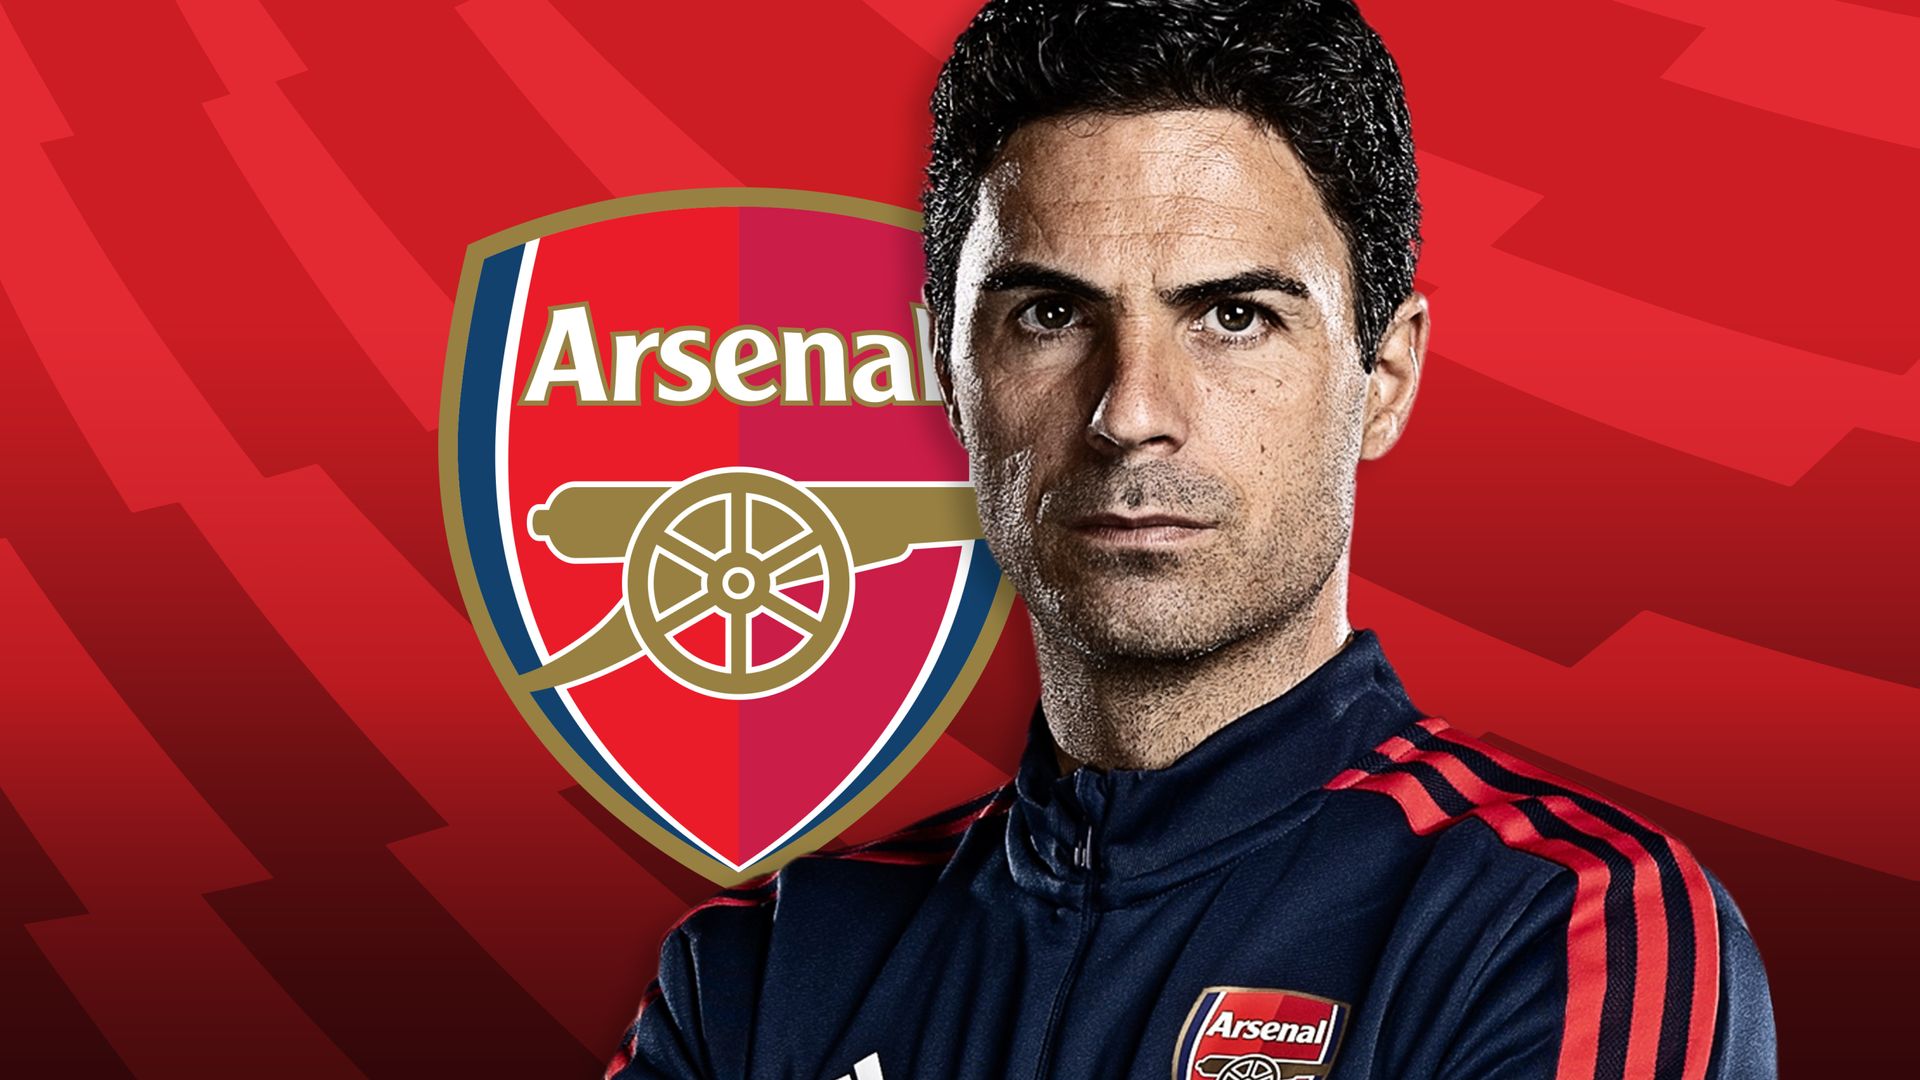 Arteta looking in the mirror for next step of Arsenal evolution